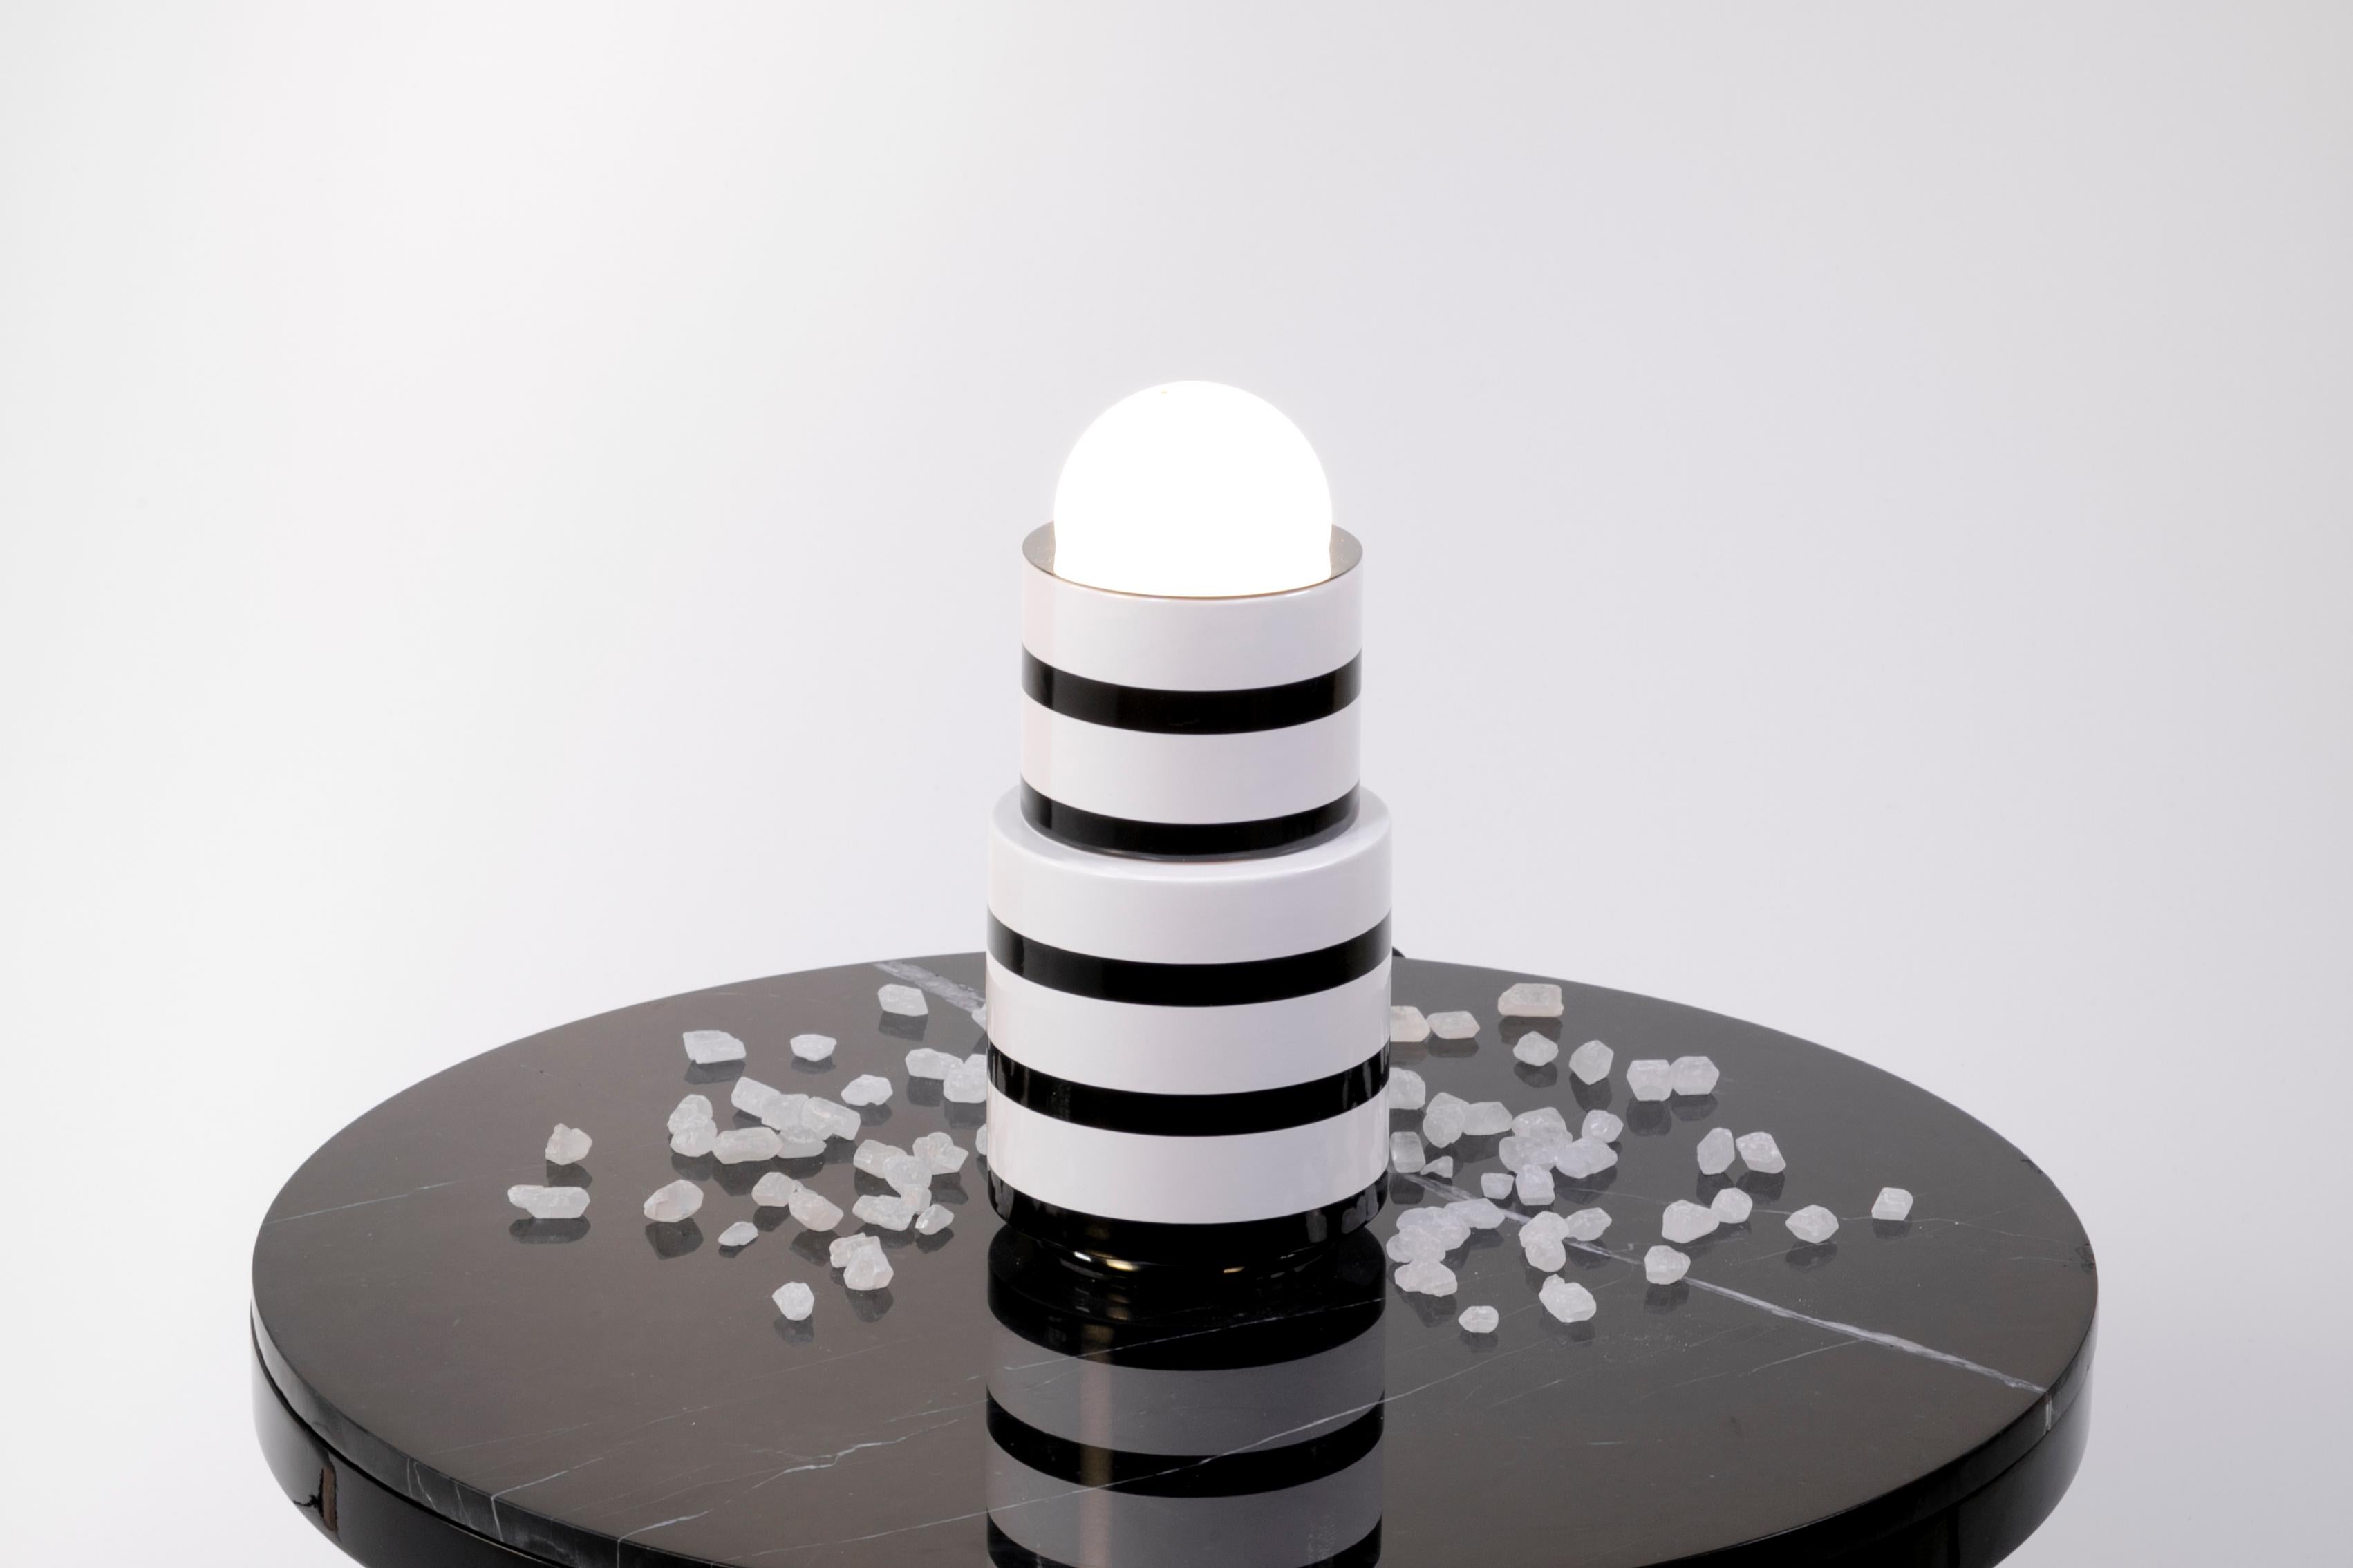 Ceramic and glass table lamp by Eric Willemart
Materials: Globe in mat white glass, black and white handcrafted ceramic
Base and top in polished silver plating
Light specifications: Socket E27, Bulb NUD White 80
Cable finish: Black